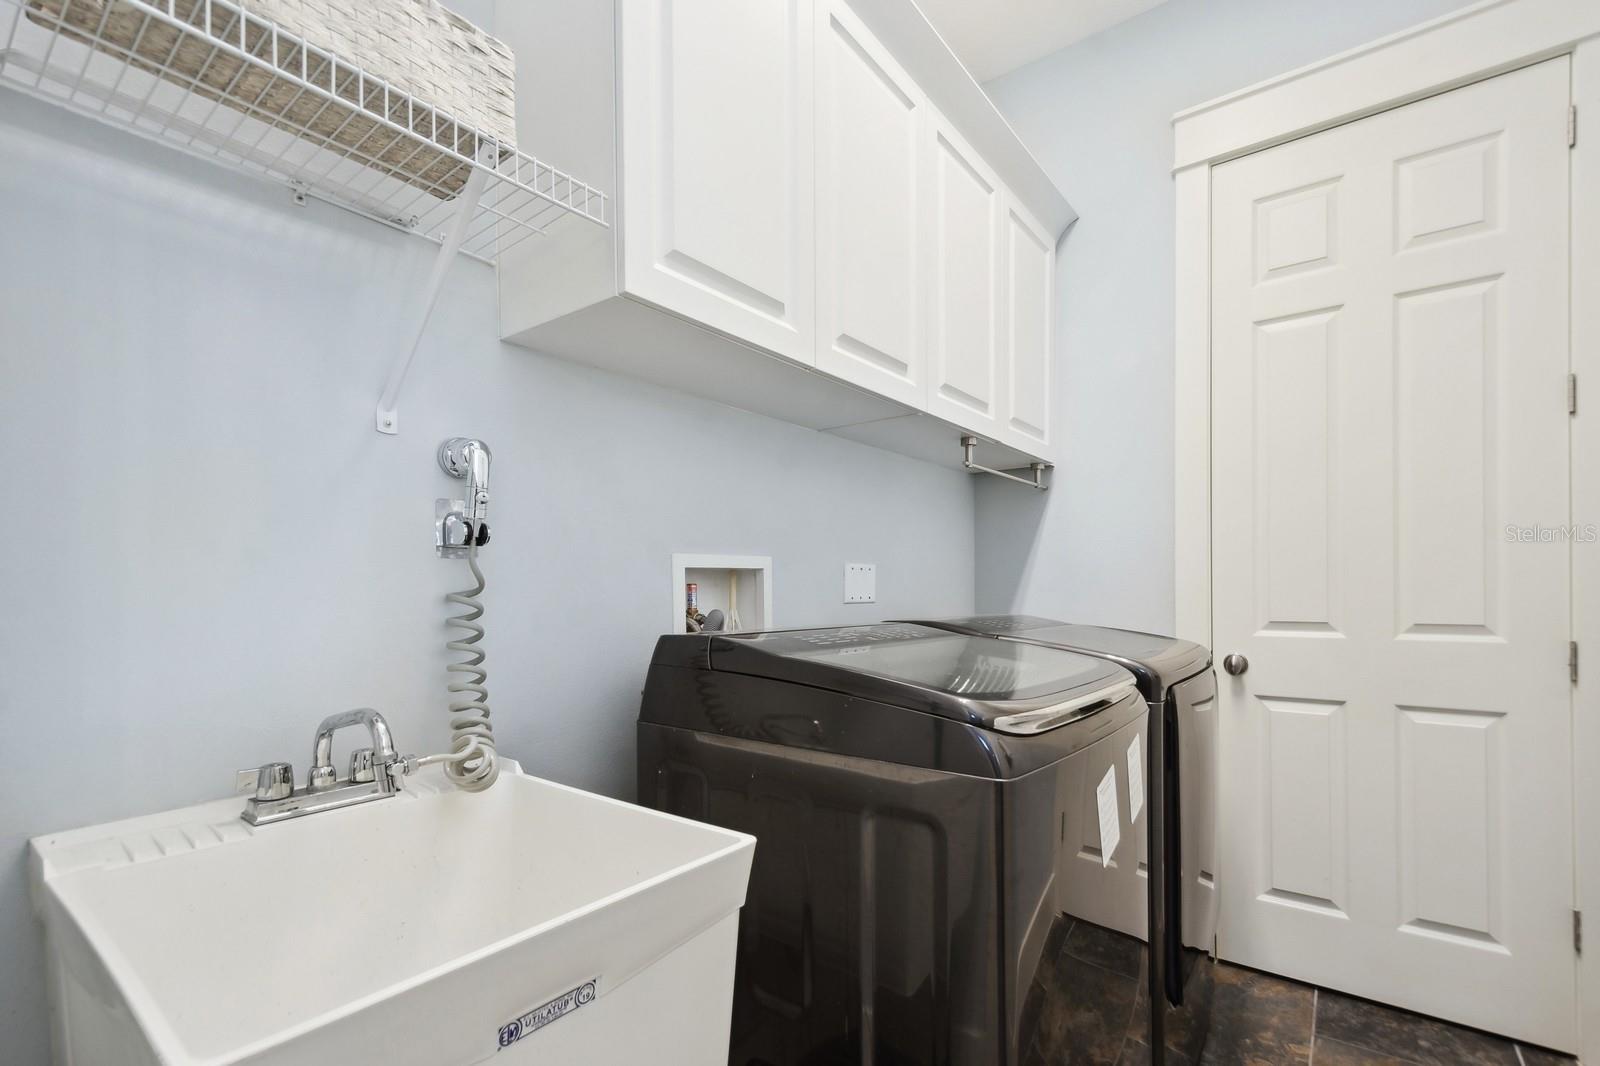 Laundry Room located on first floor